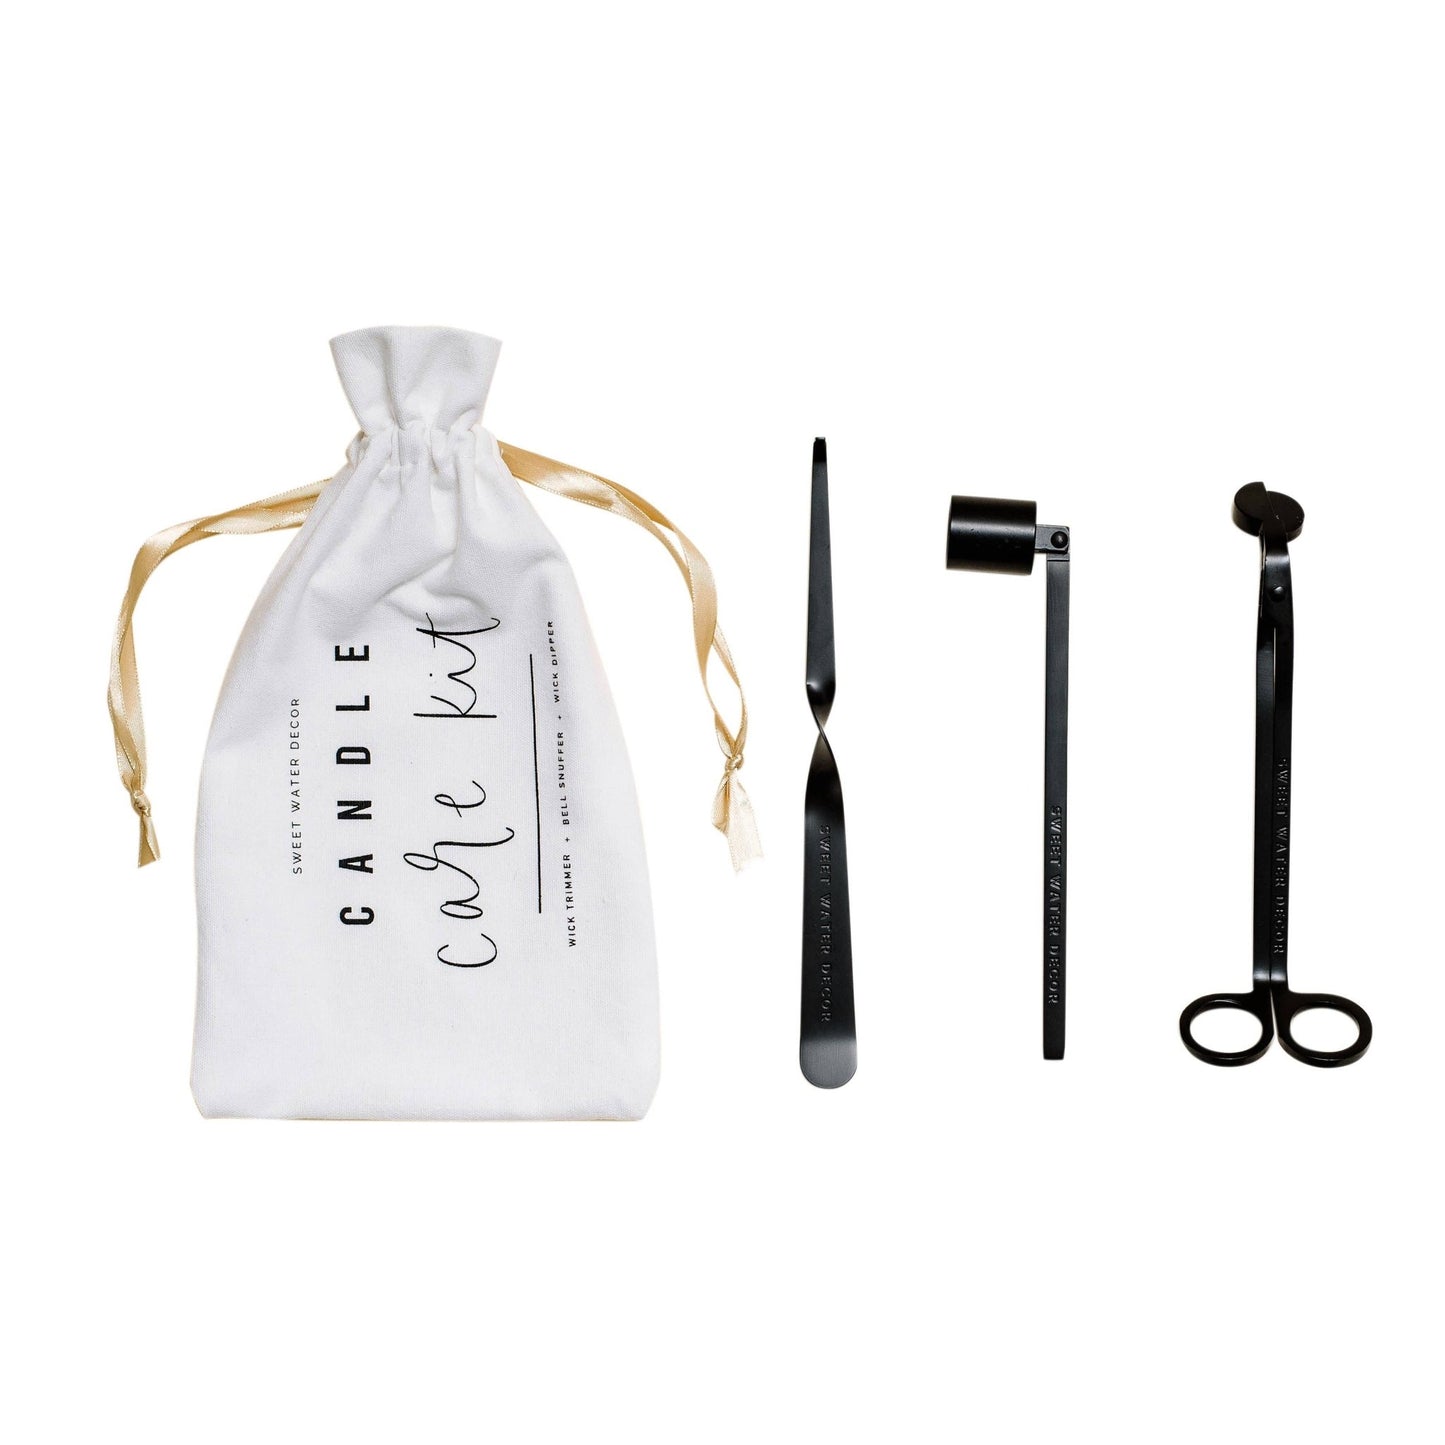 Black Candle Care Kit - Candle Tools - Candle Accessories - PaperGeenius